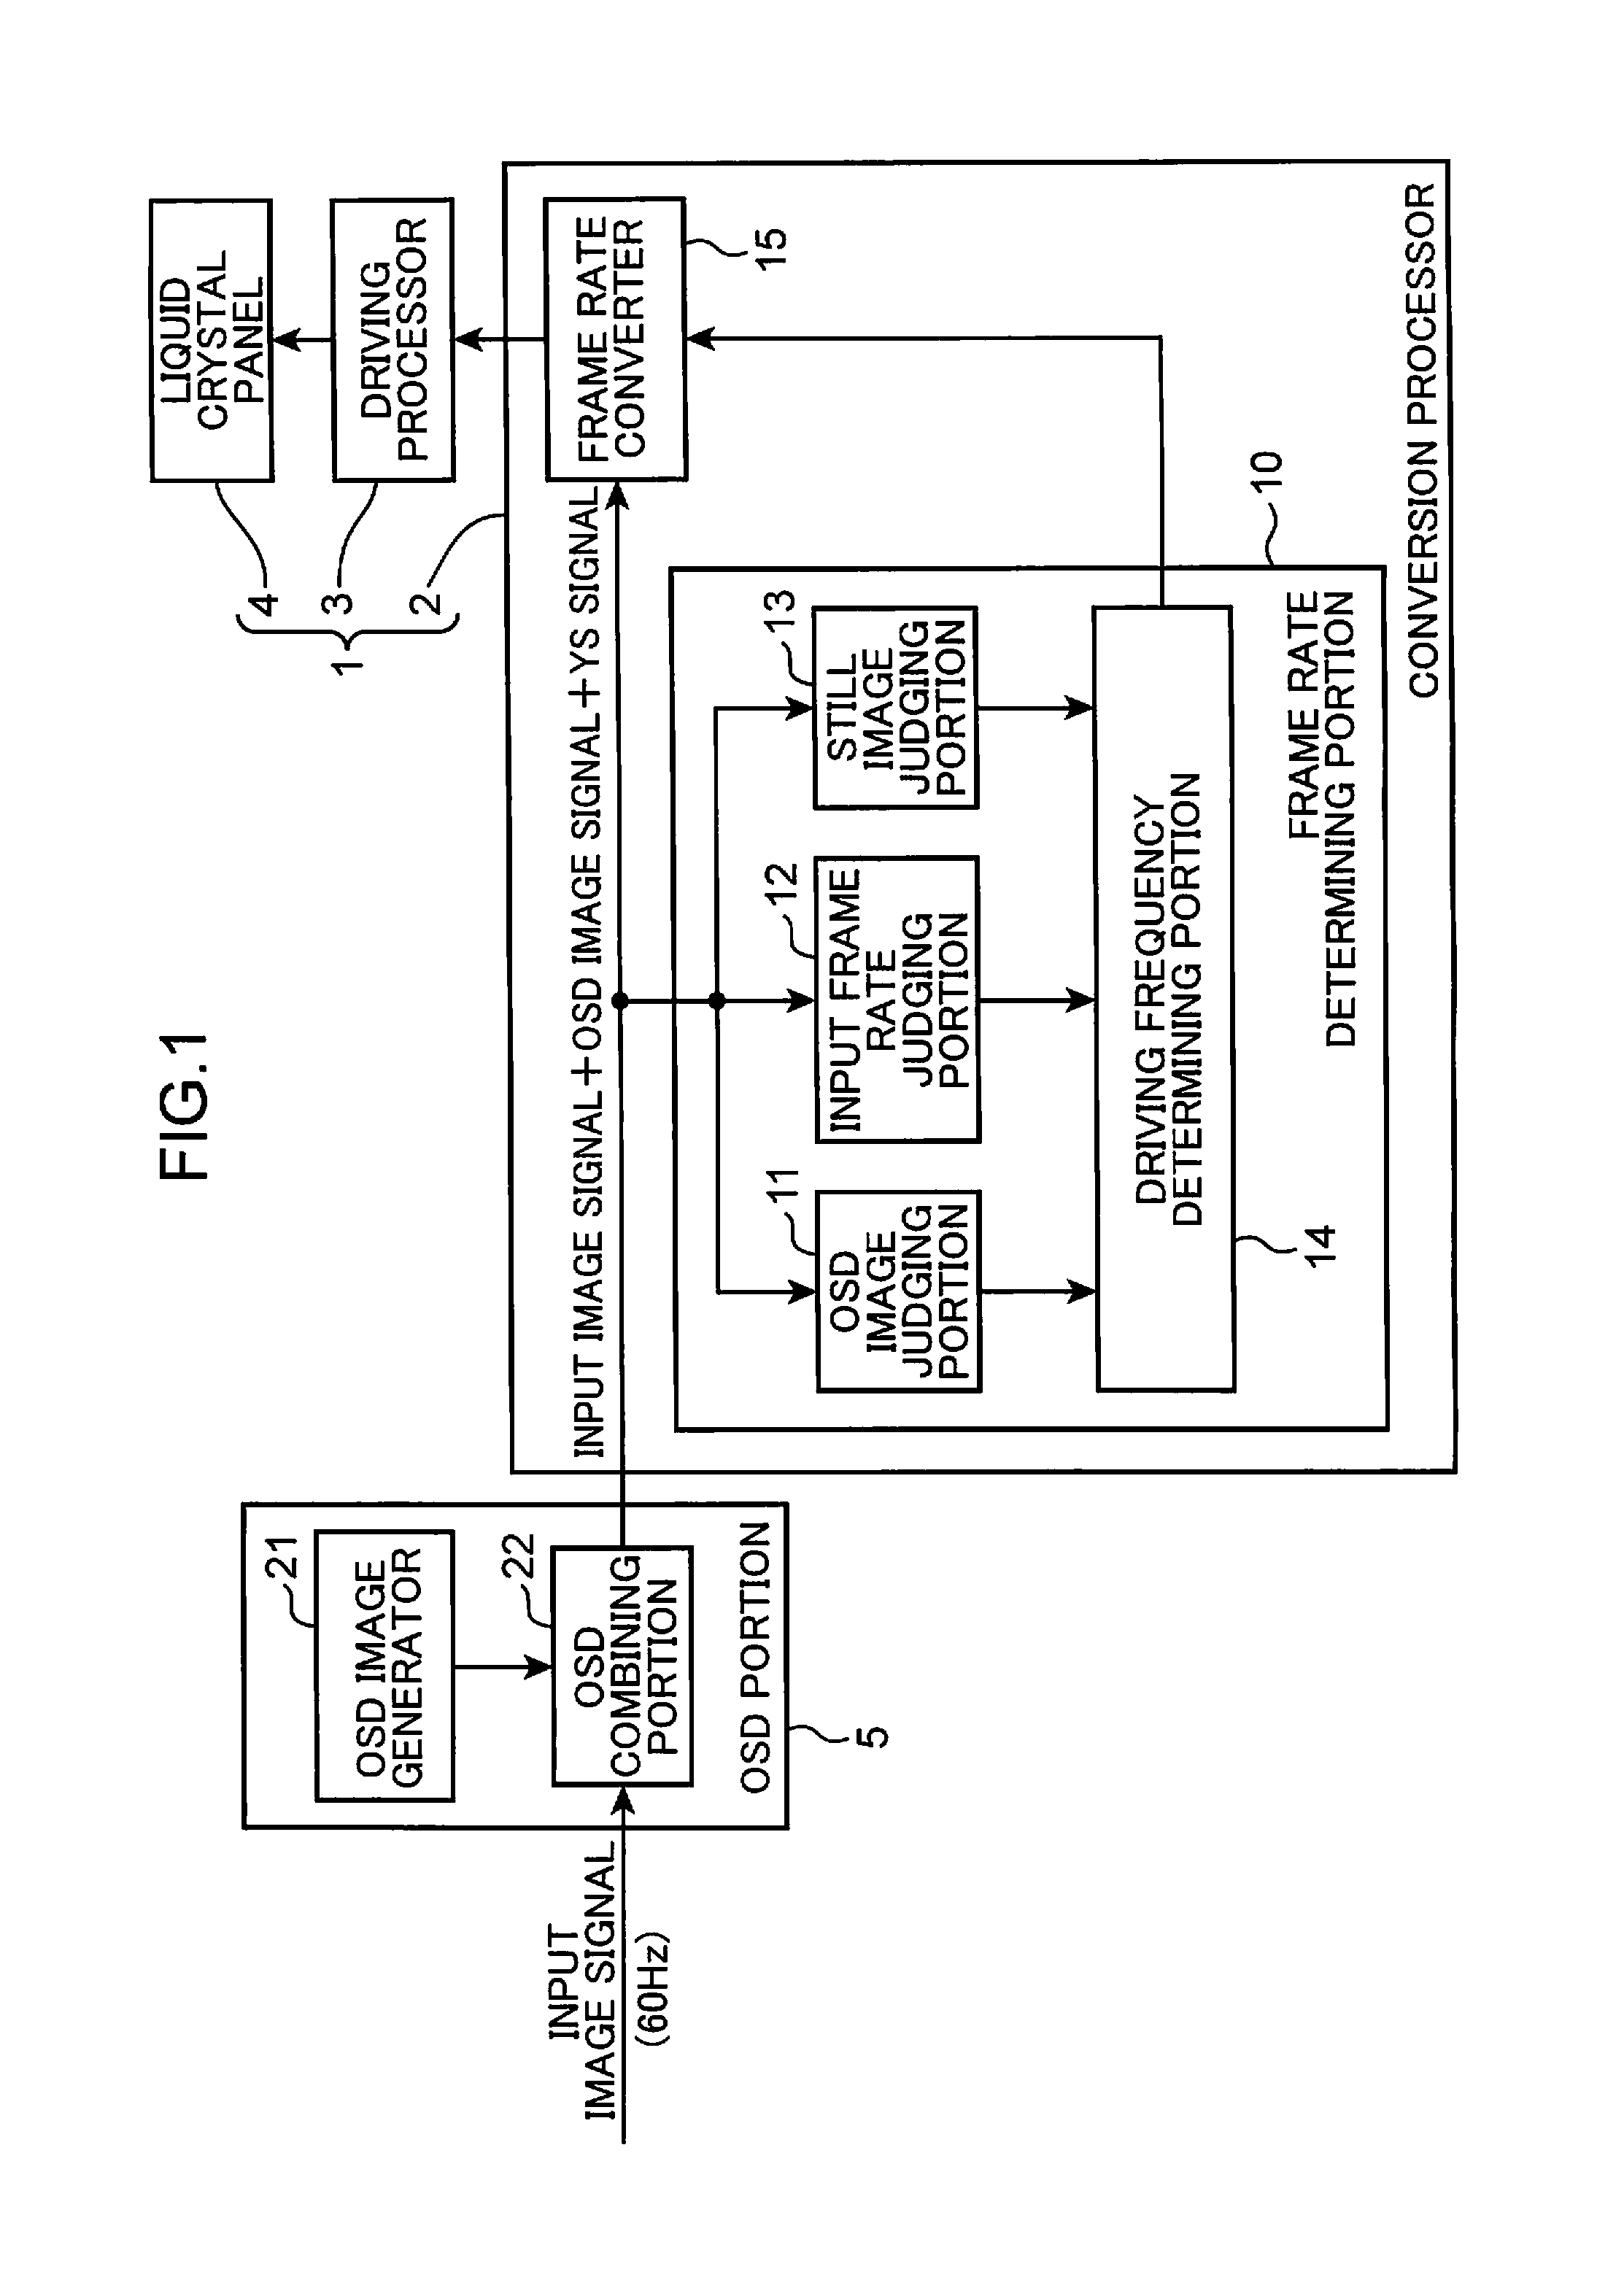 Display control device and display control method